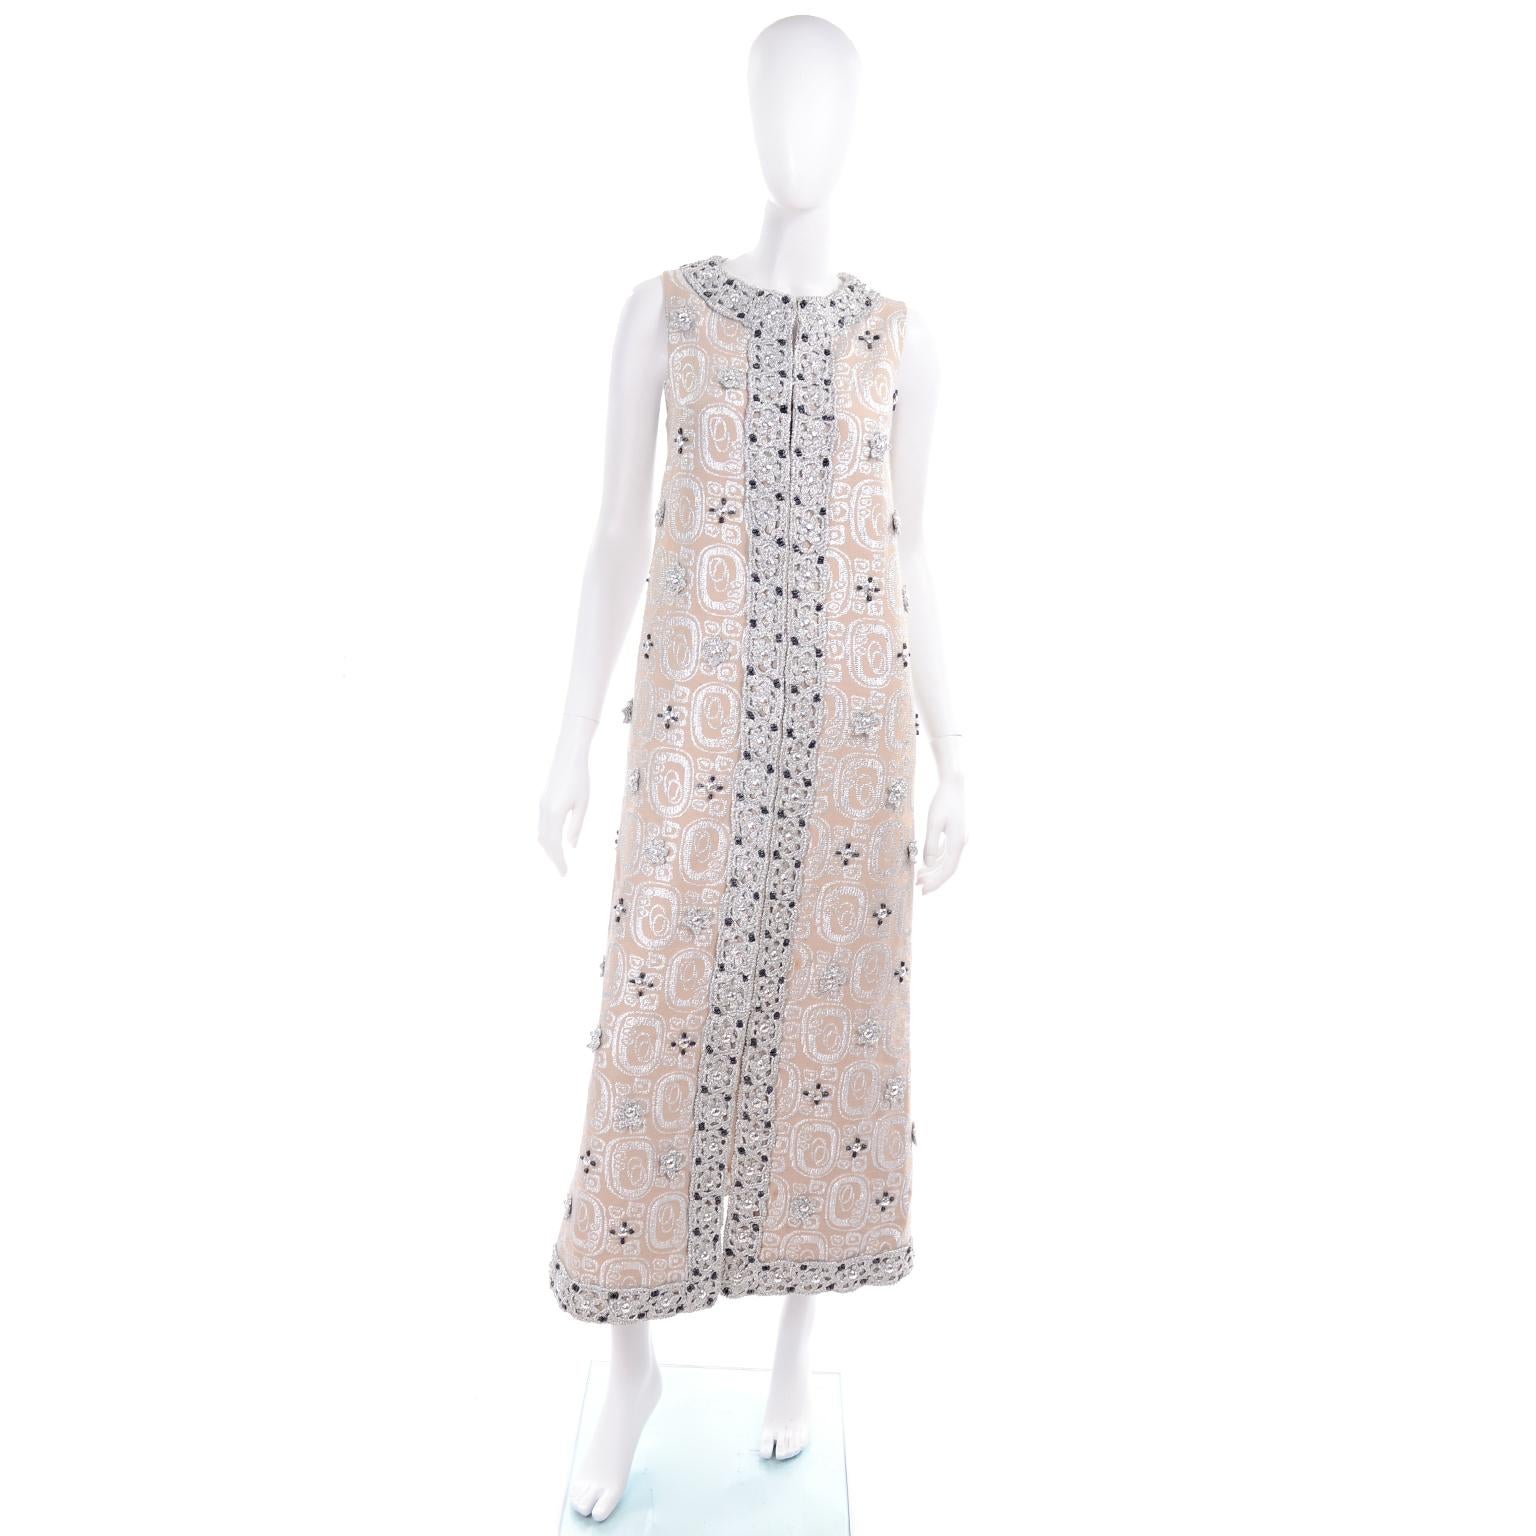 This beautiful 1960's evening gown is sleeveless and the cream silk and silver lurex fabric is covered with gorgeous beaded and braided metallic flowers and rhinestones. The dress is lined in pure silk and has hidden hooks and eyes up the front for